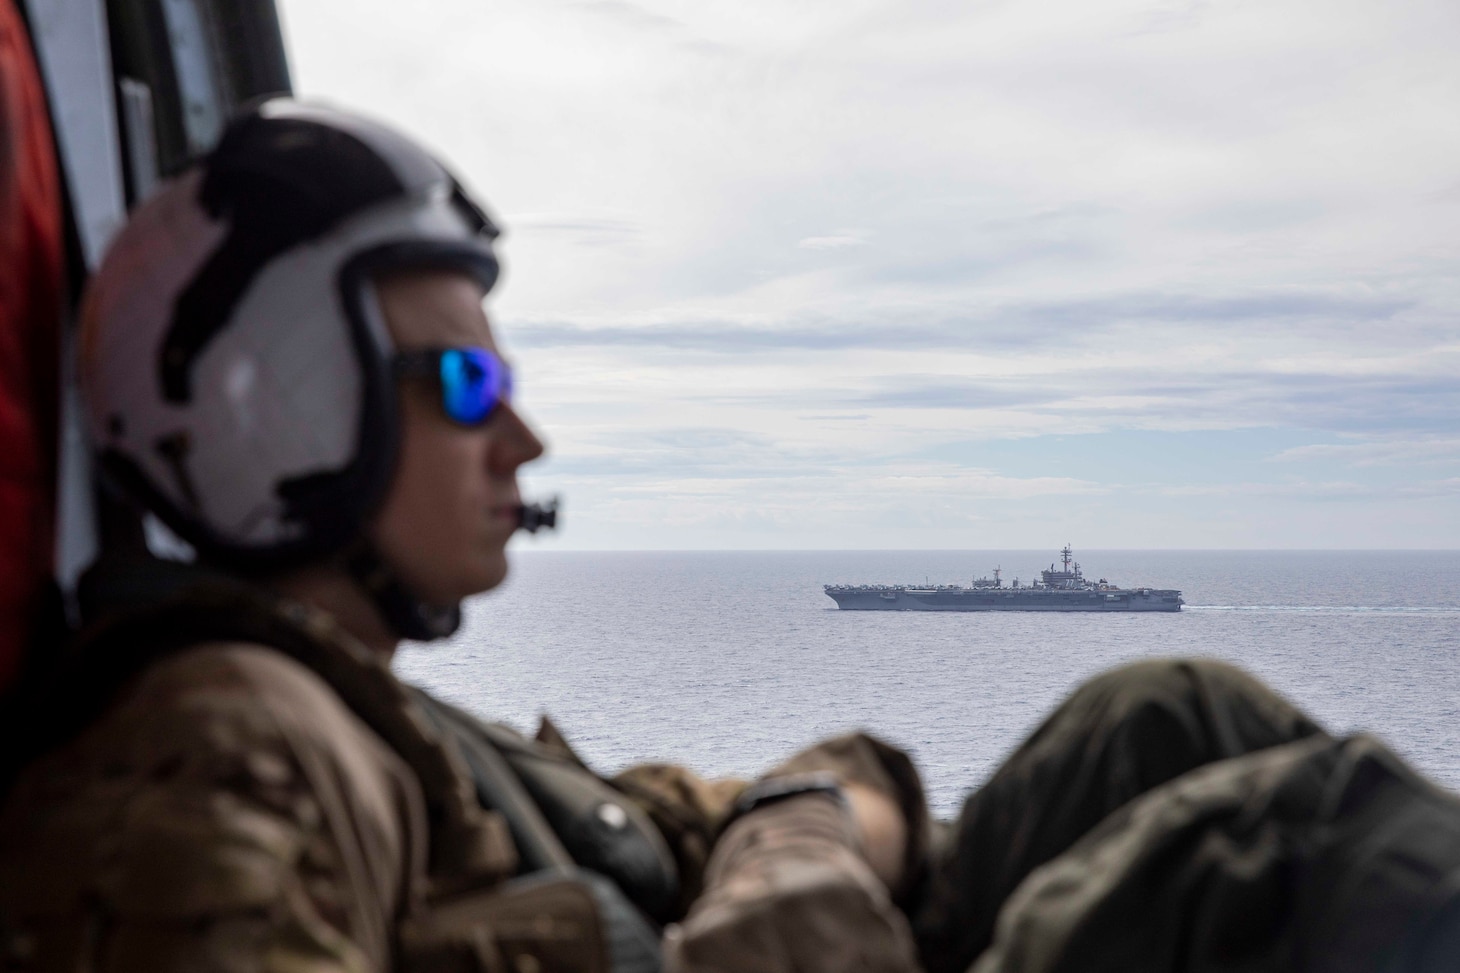 Naval Aircrewman (Helicopter) 2nd Class Brian Sedin watches as the Nimitz-class aircraft carrier USS George H.W. Bush (CVN 77), sails alongside the supply-class fast combat support ship USNS Arctic (T-AOE 8) during a replenishment-at-sea, Sept. 29, 2022. Carrier Air Wing (CVW) 7 is the offensive air and strike component of Carrier Strike Group (CSG) 10 and the George H.W. Bush Carrier Strike Group (GHWBCSG). The squadrons of CVW-7 are Strike Fighter Squadron (VFA) 143, VFA-103, VFO-86, VFA-136, Electronic Attack Squadron (VAQ) 140, VAW-121, HSC-5, and Helicopter Maritime Strike Squadron (HSM) 46. The GHWBCSG is on a scheduled deployment in the U.S. Naval Forces Europe area of operations, employed by U.S. Sixth Fleet to defend U.S., allied and partner interests.